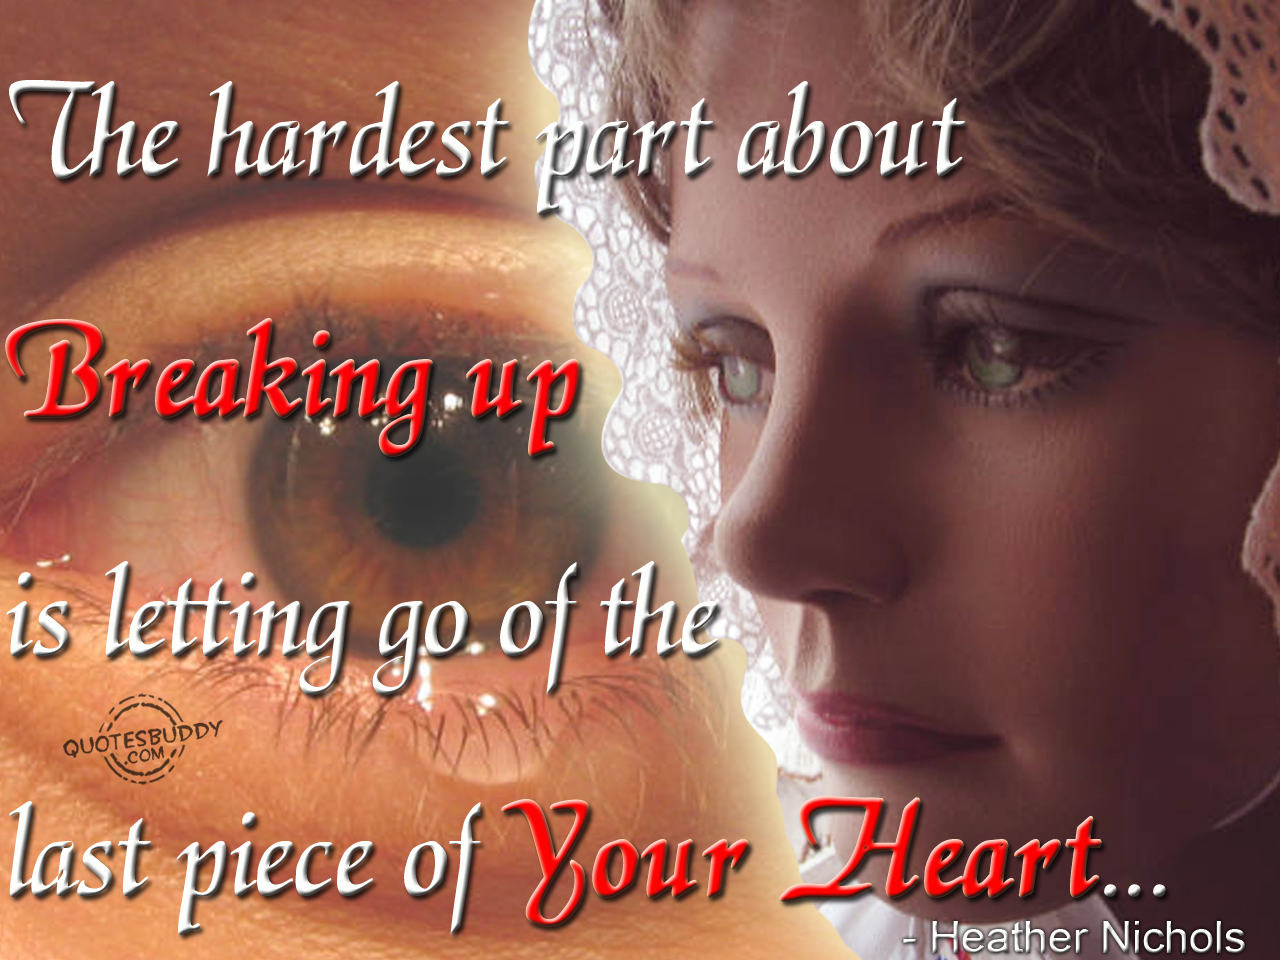 The Hardest Part About Breaking Up Is Letting Go Of The Last Piece Of Your Heart